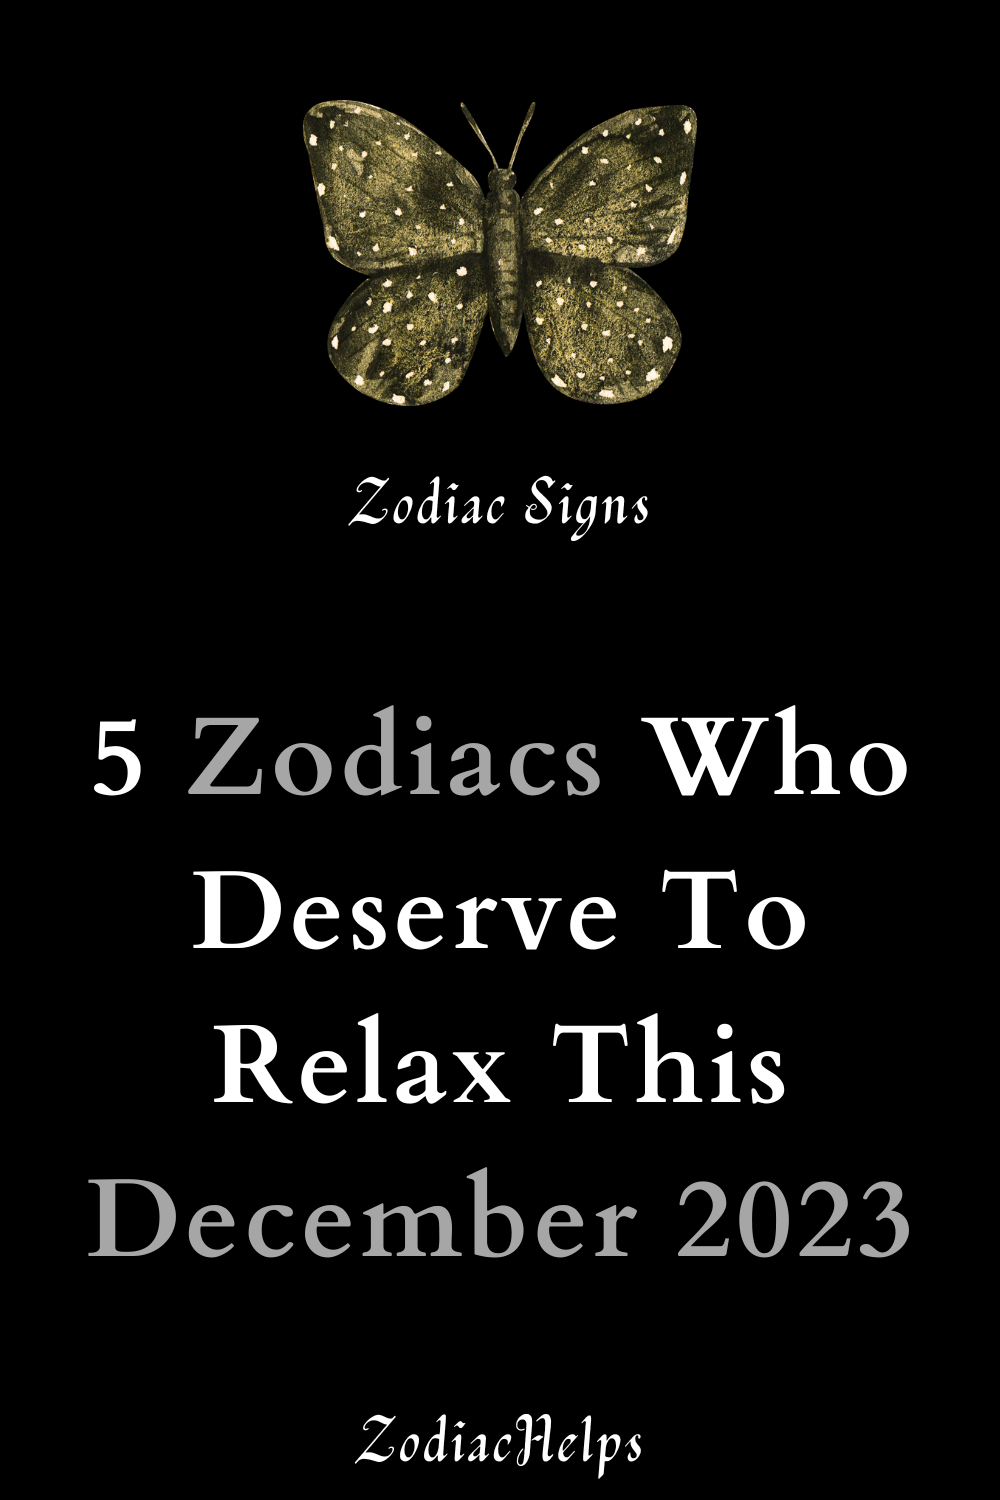 5 Zodiacs Who Deserve To Relax This December 2023